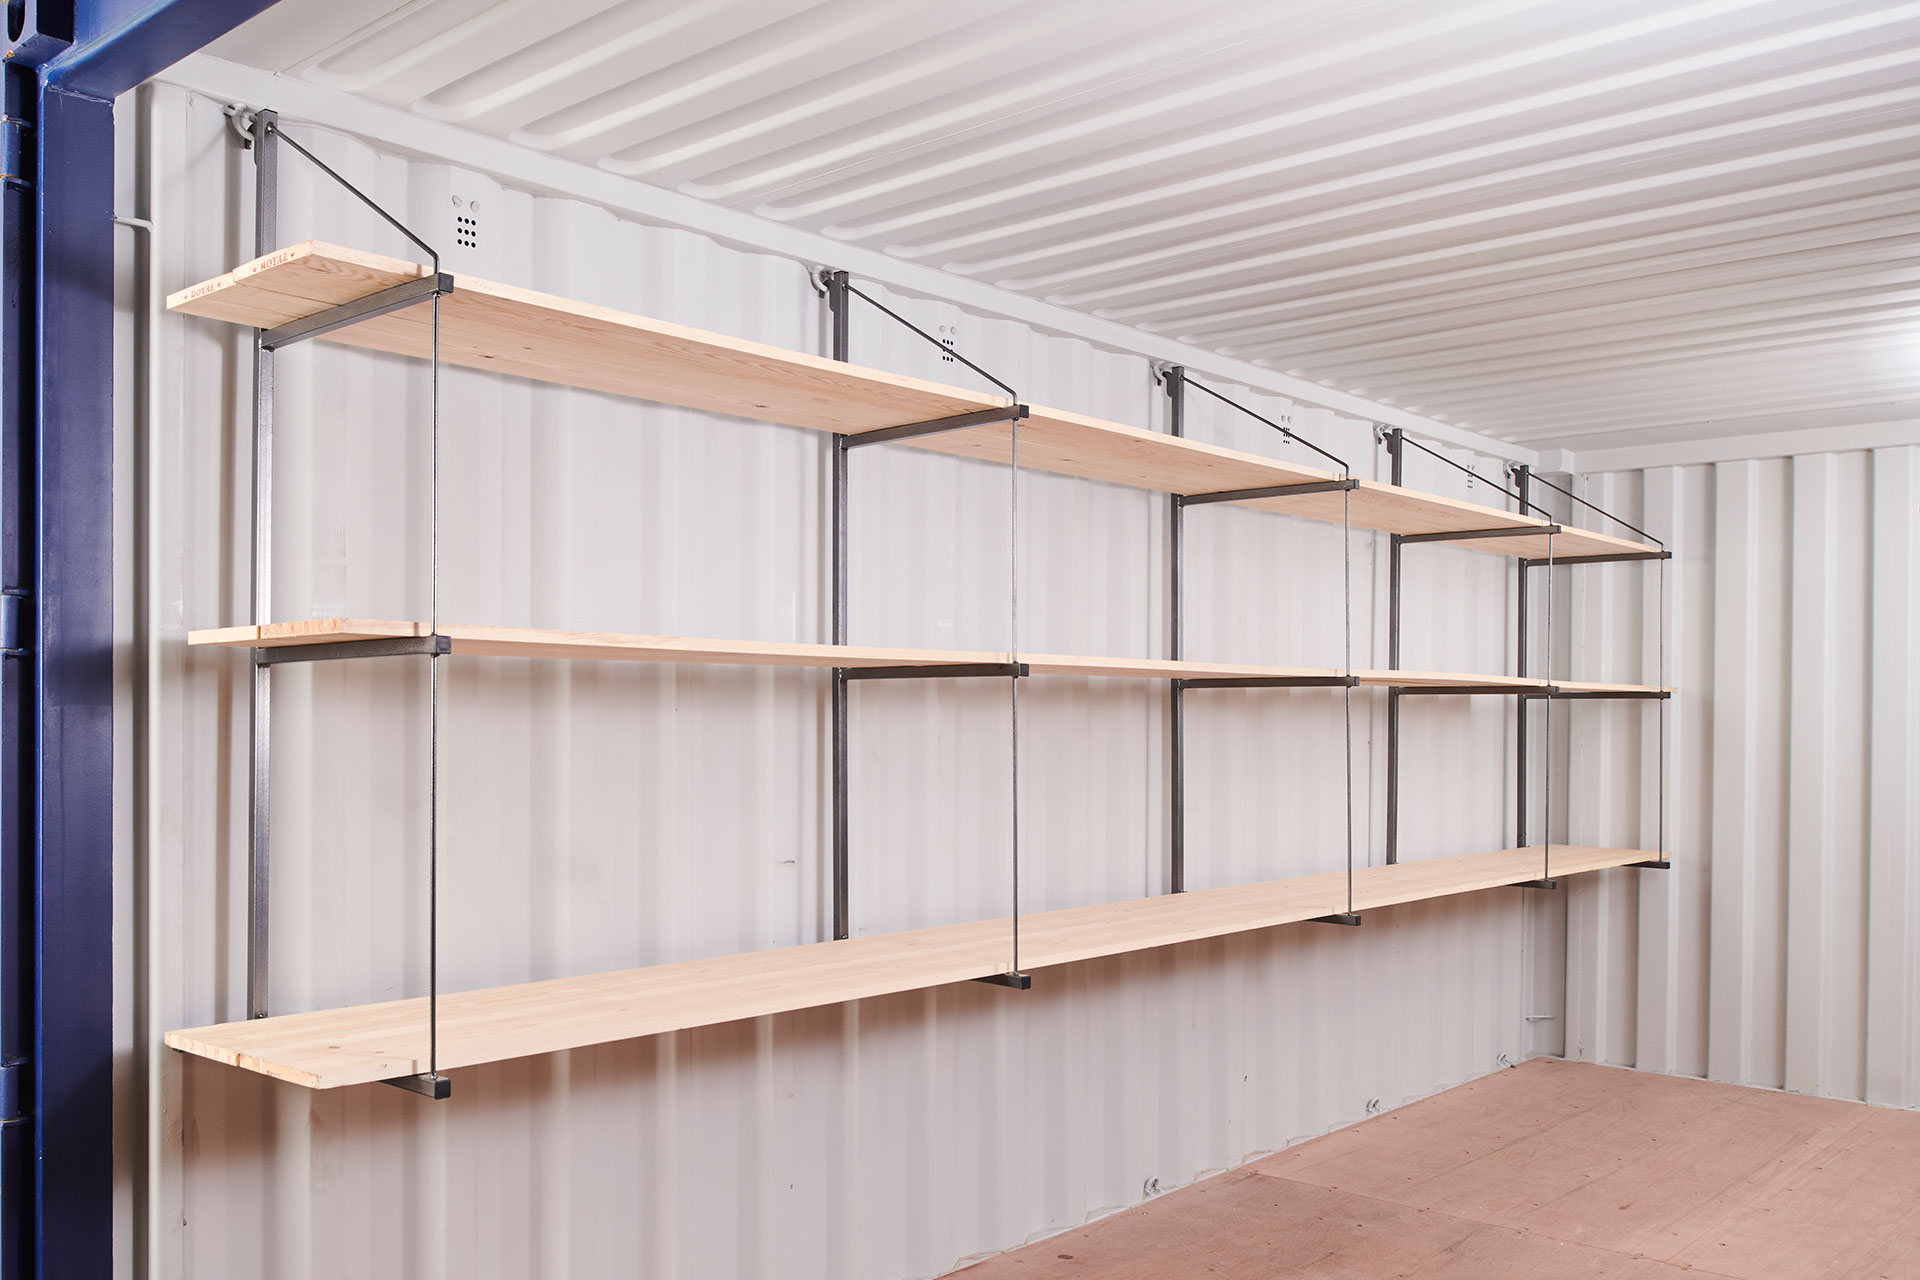 Shipping container shelving and racking for sale